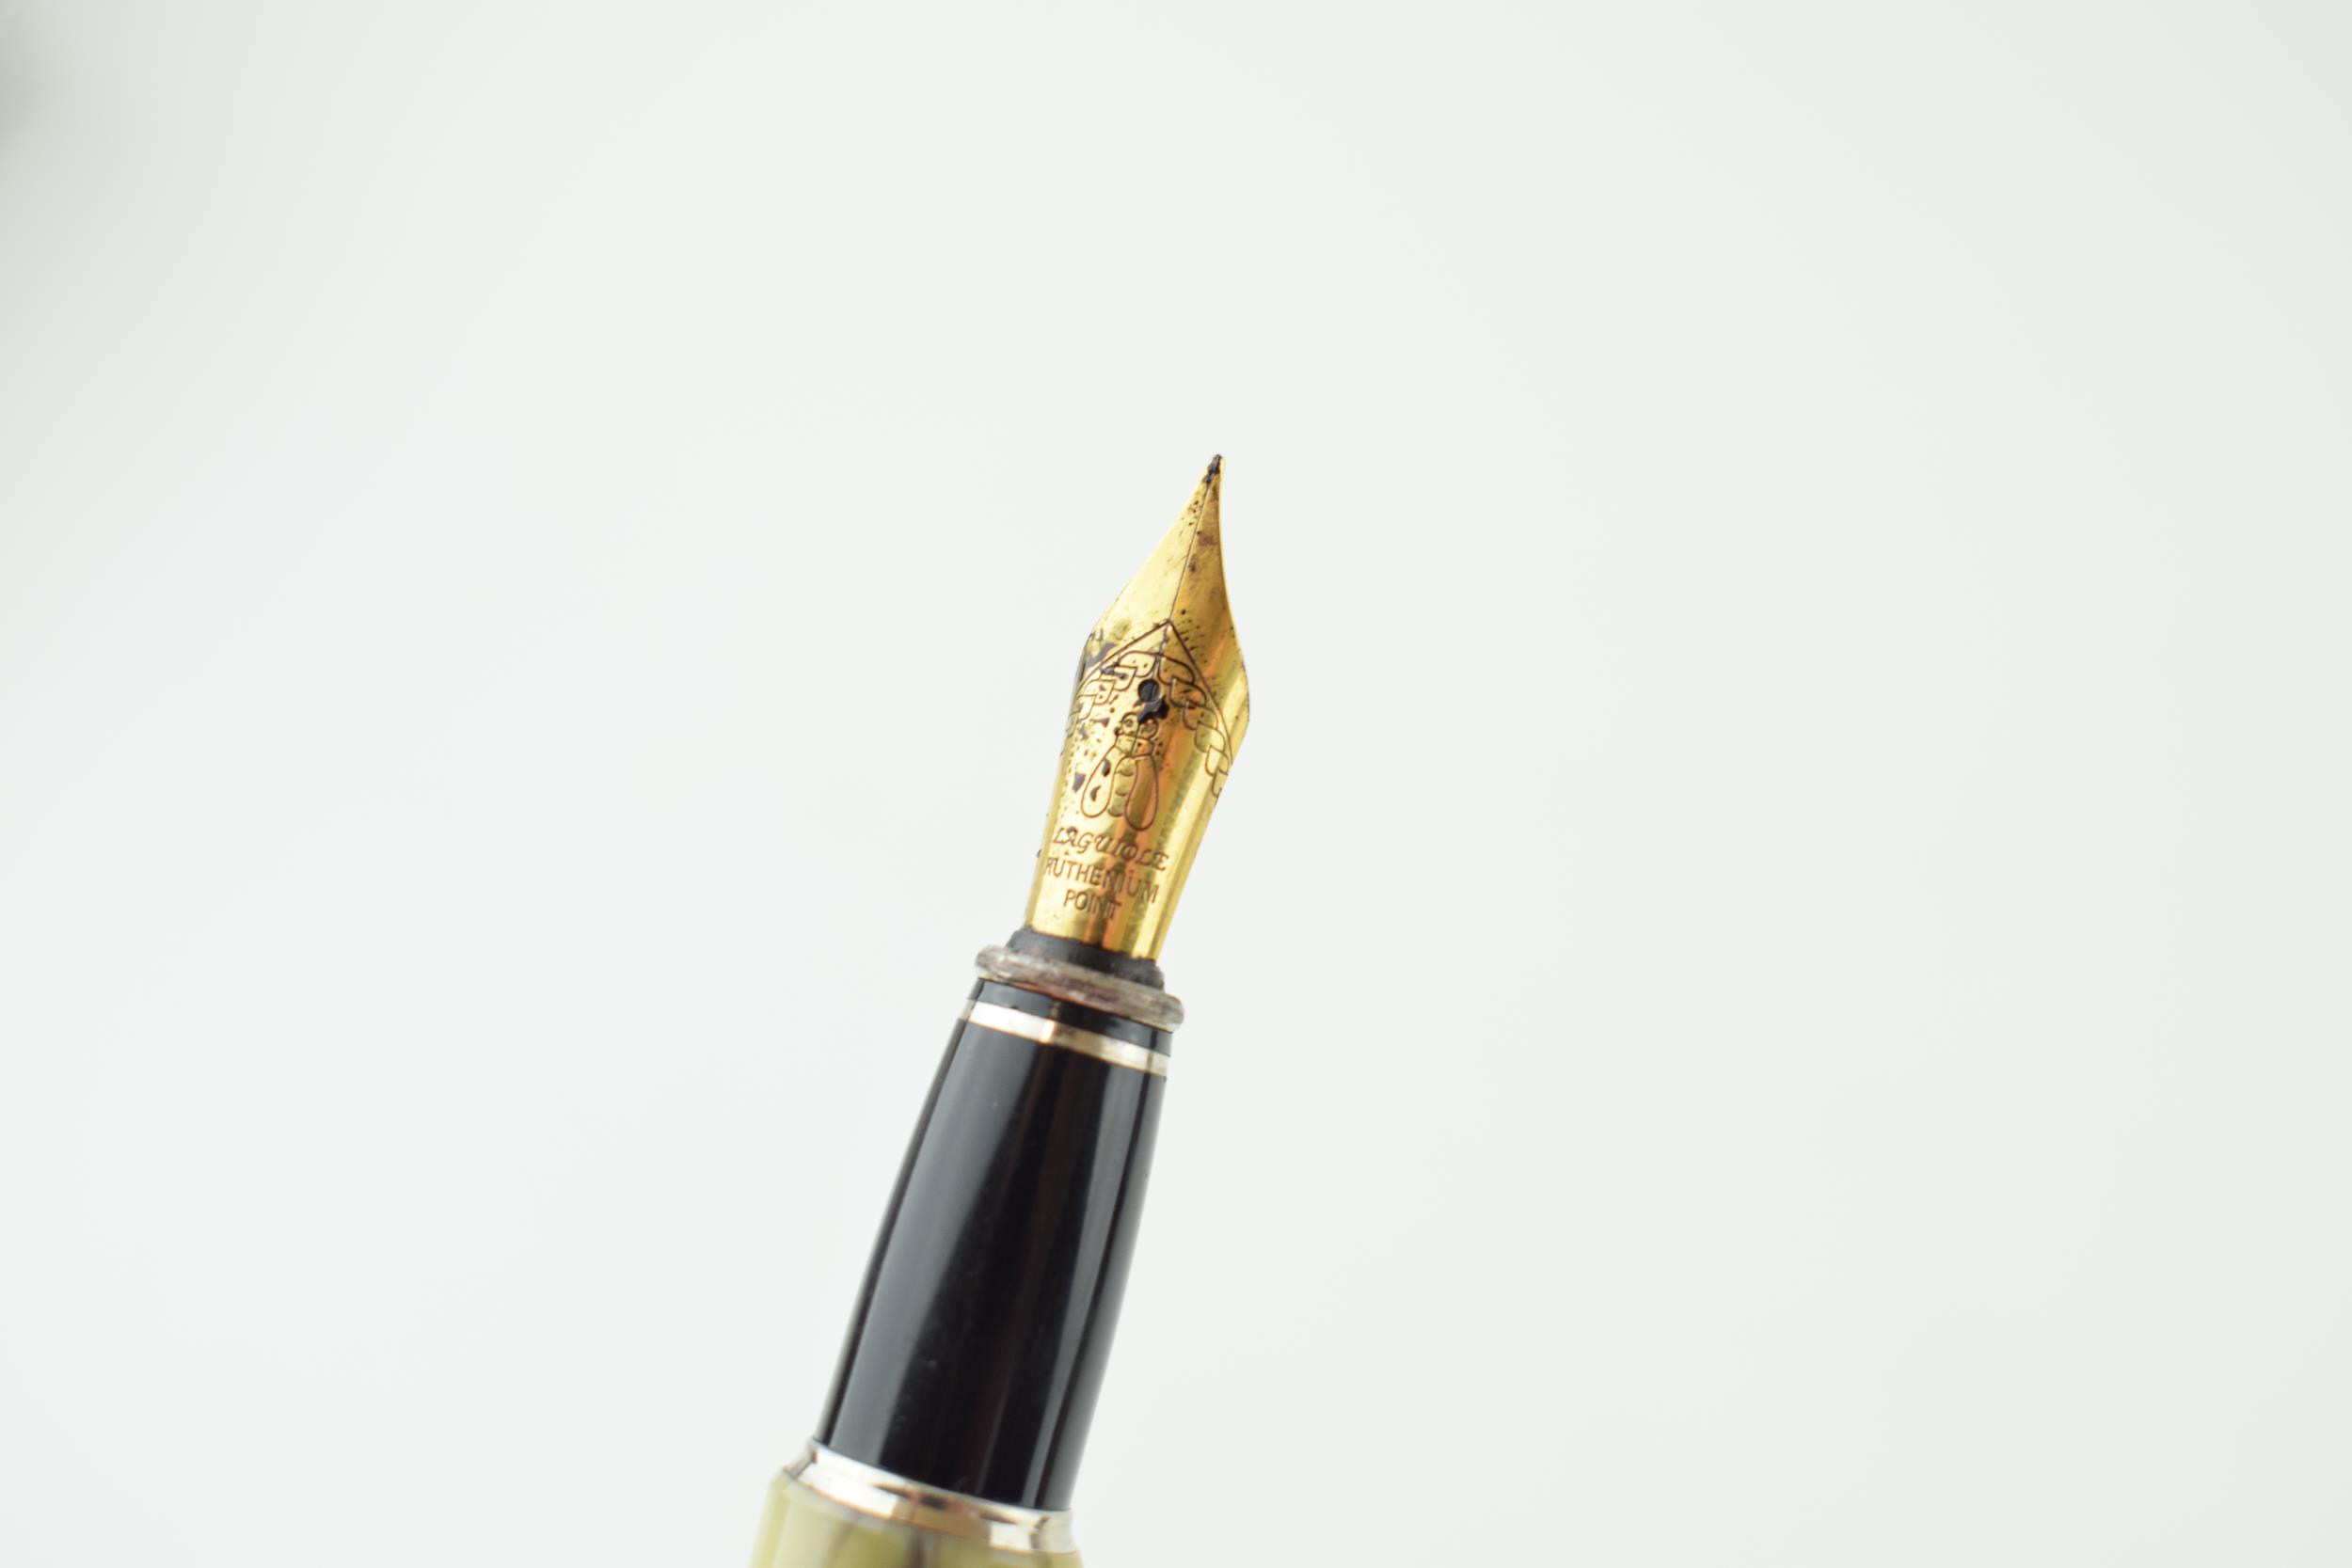 Vintage French fountain pen by Laguile Ecriture, marbled plastic in an Art Deco design with bee - Image 3 of 3